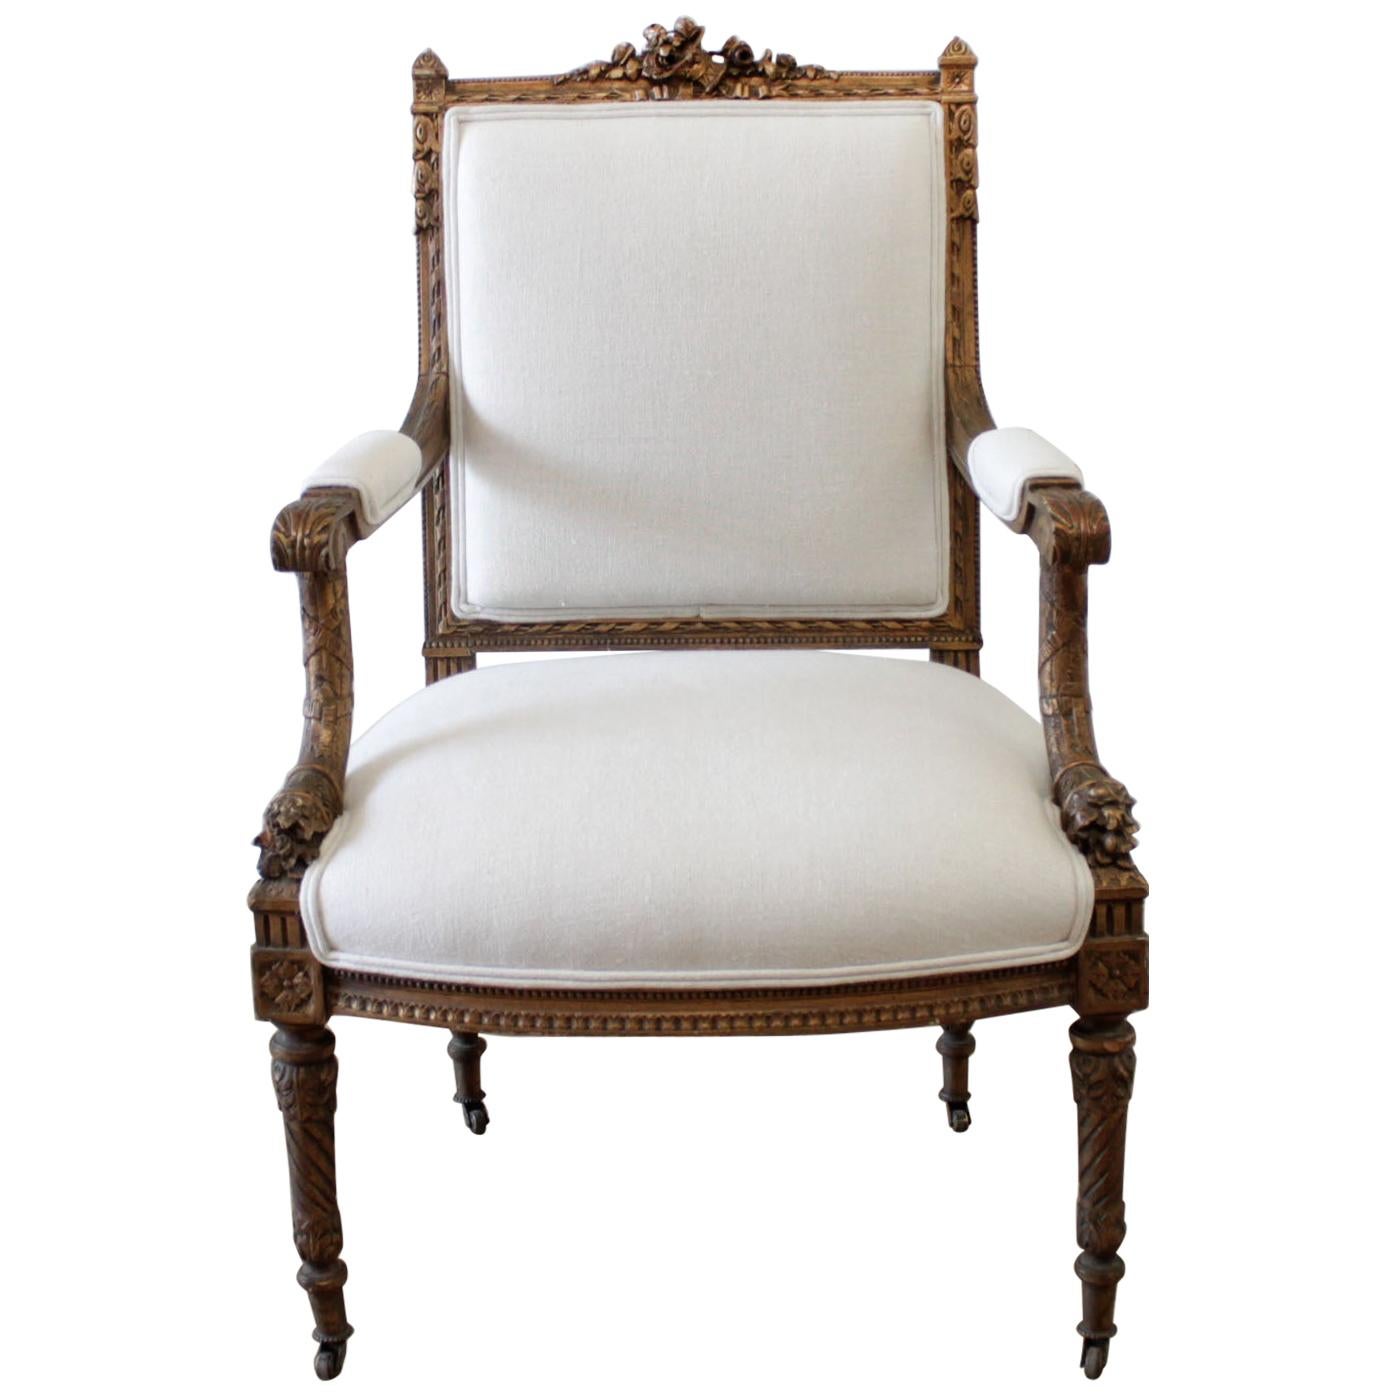 Antique Giltwood French Louis XVI Style Chair with Linen Upholstery